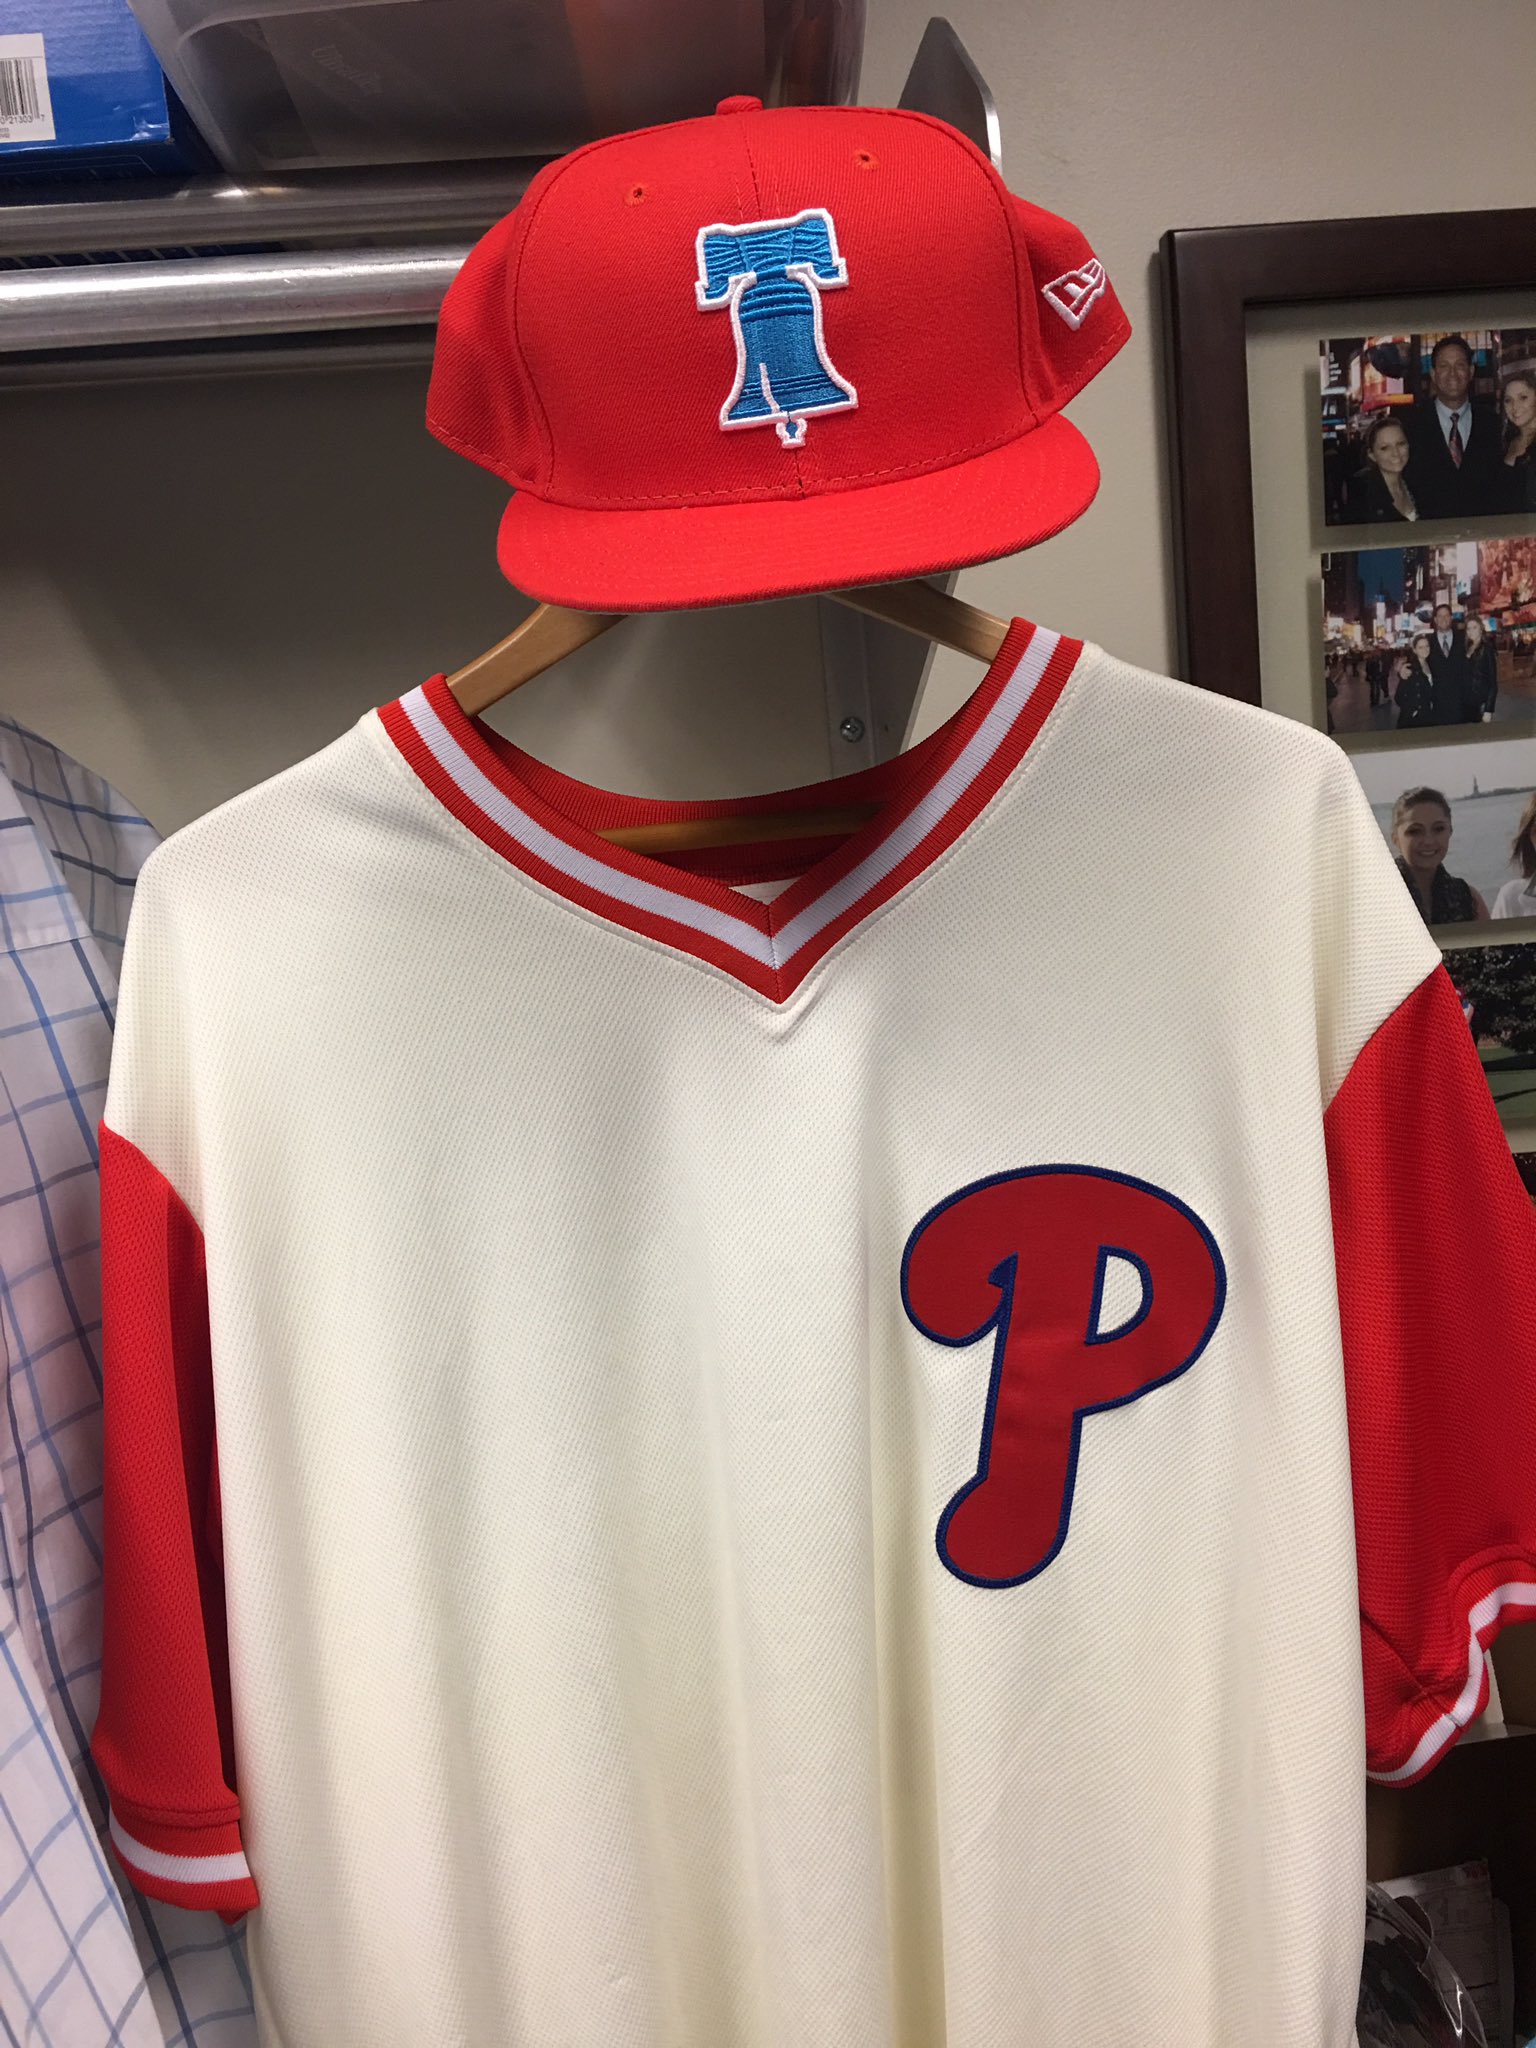 Dan Plesac on X: Yo @CanYouNat_ .any interest in this Phillies jersey  & hat sent to me 4 MLB players weekend? Might be a touch big but  Halloween soon!  / X